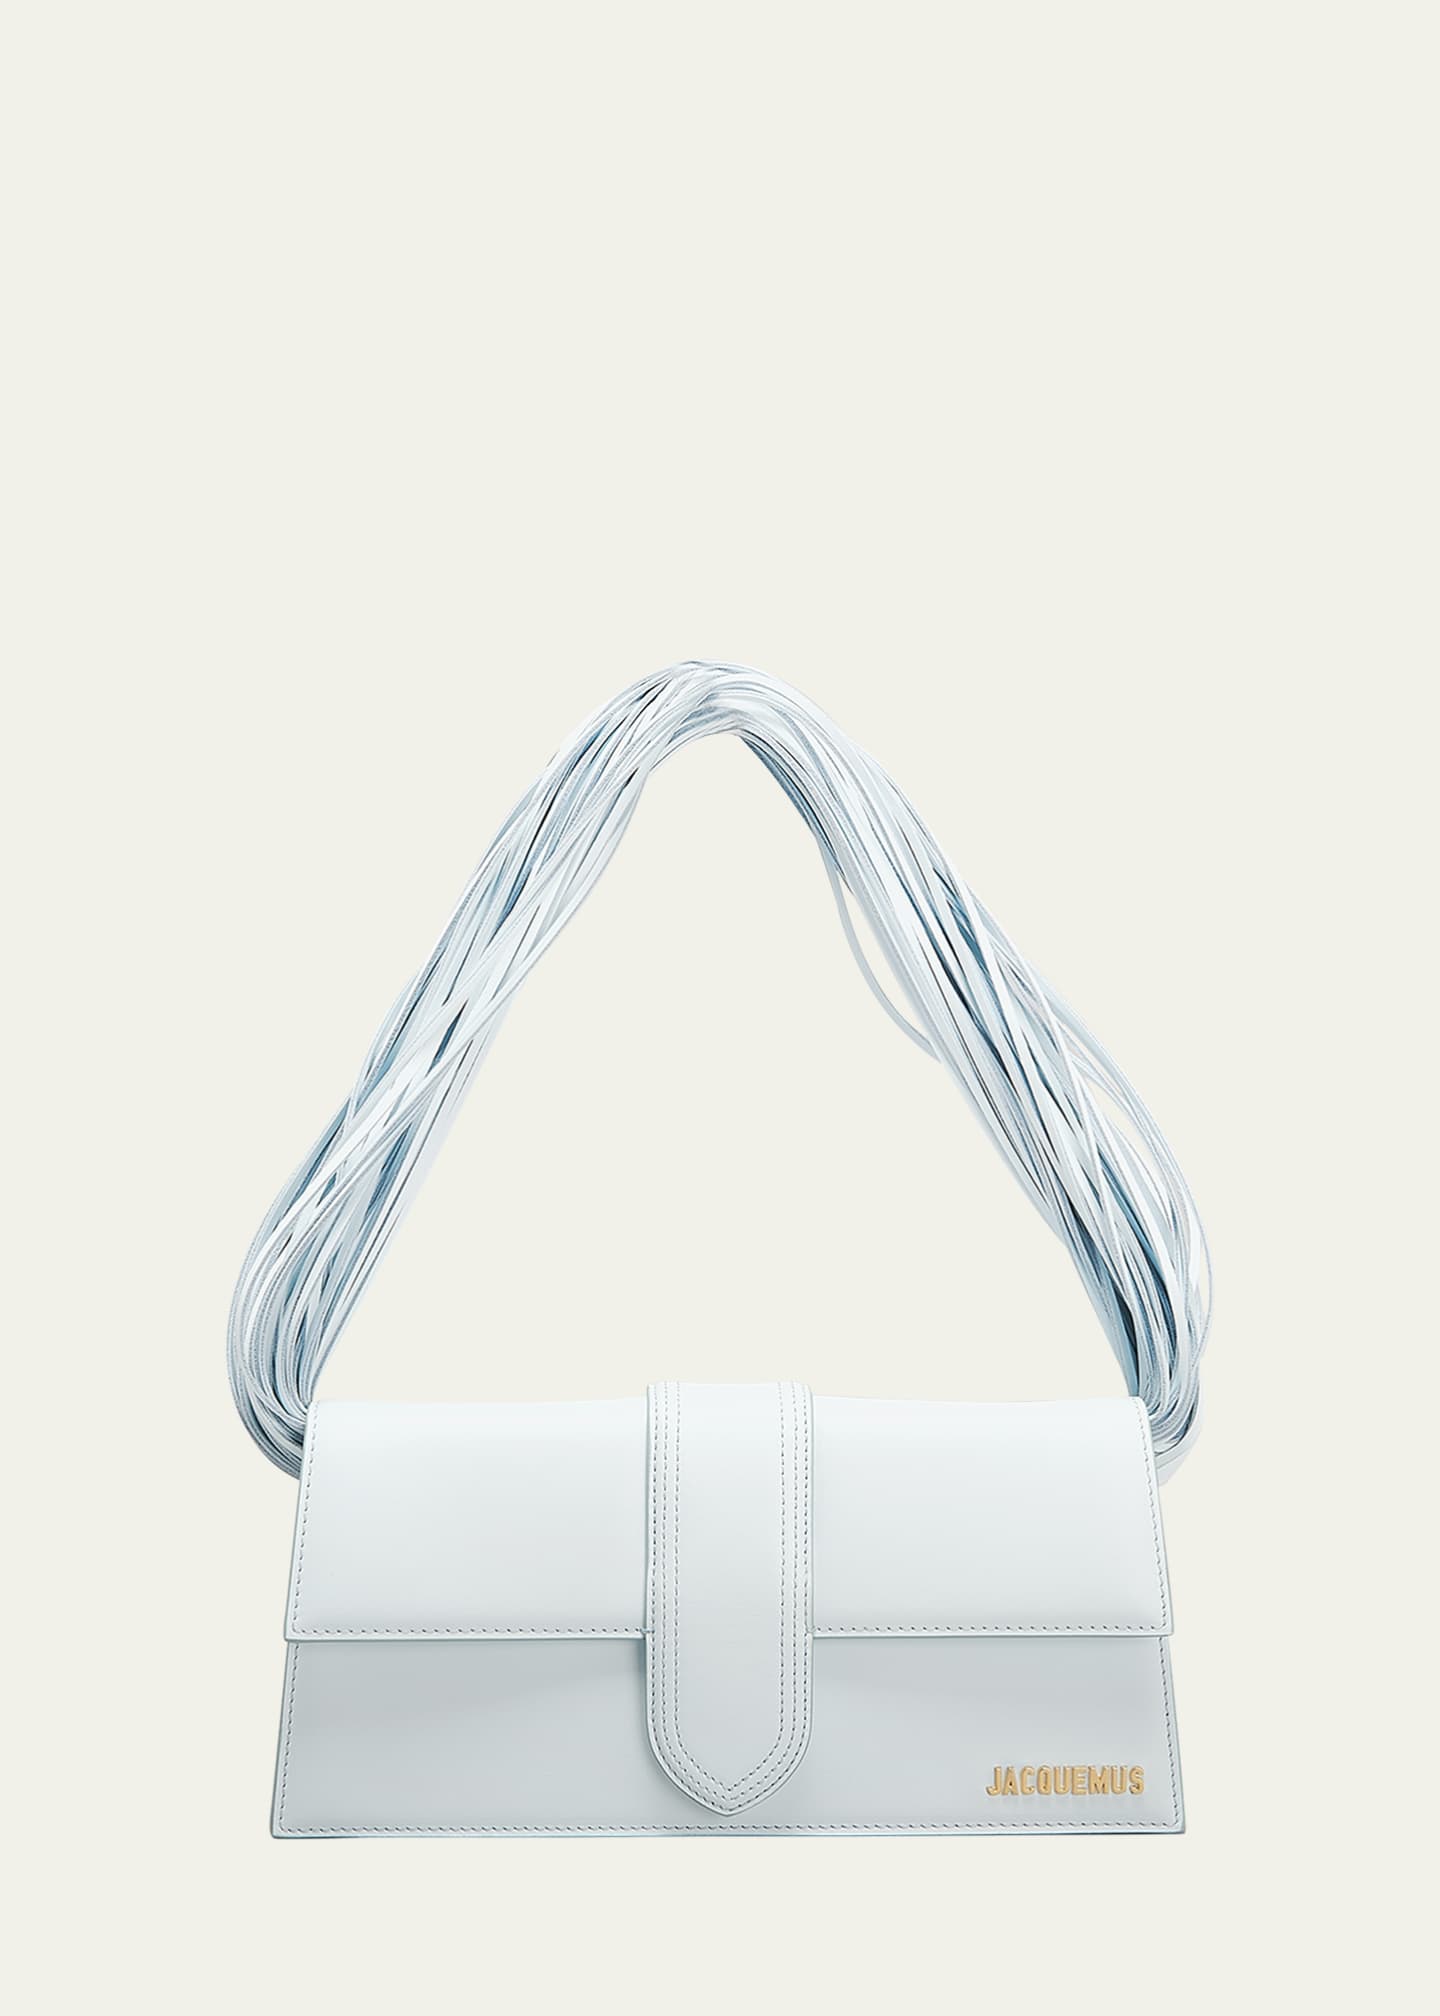 Le Bambino Long Leather Shoulder Bag in White - Jacquemus